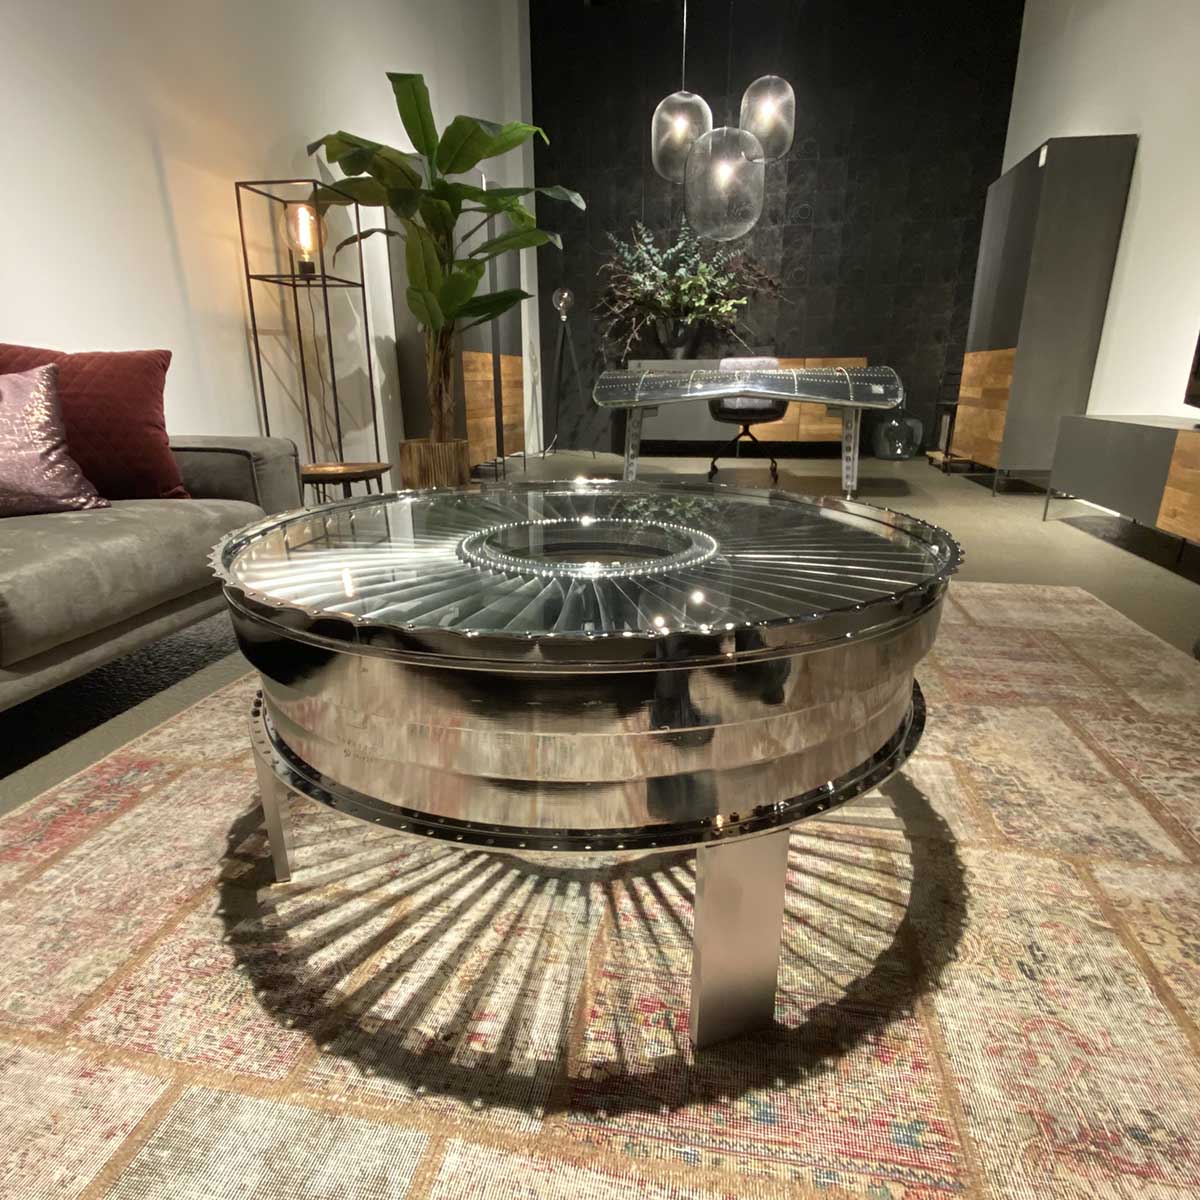 Polished rear fan case of a P&W JT8D in use as a table in a modern living room.